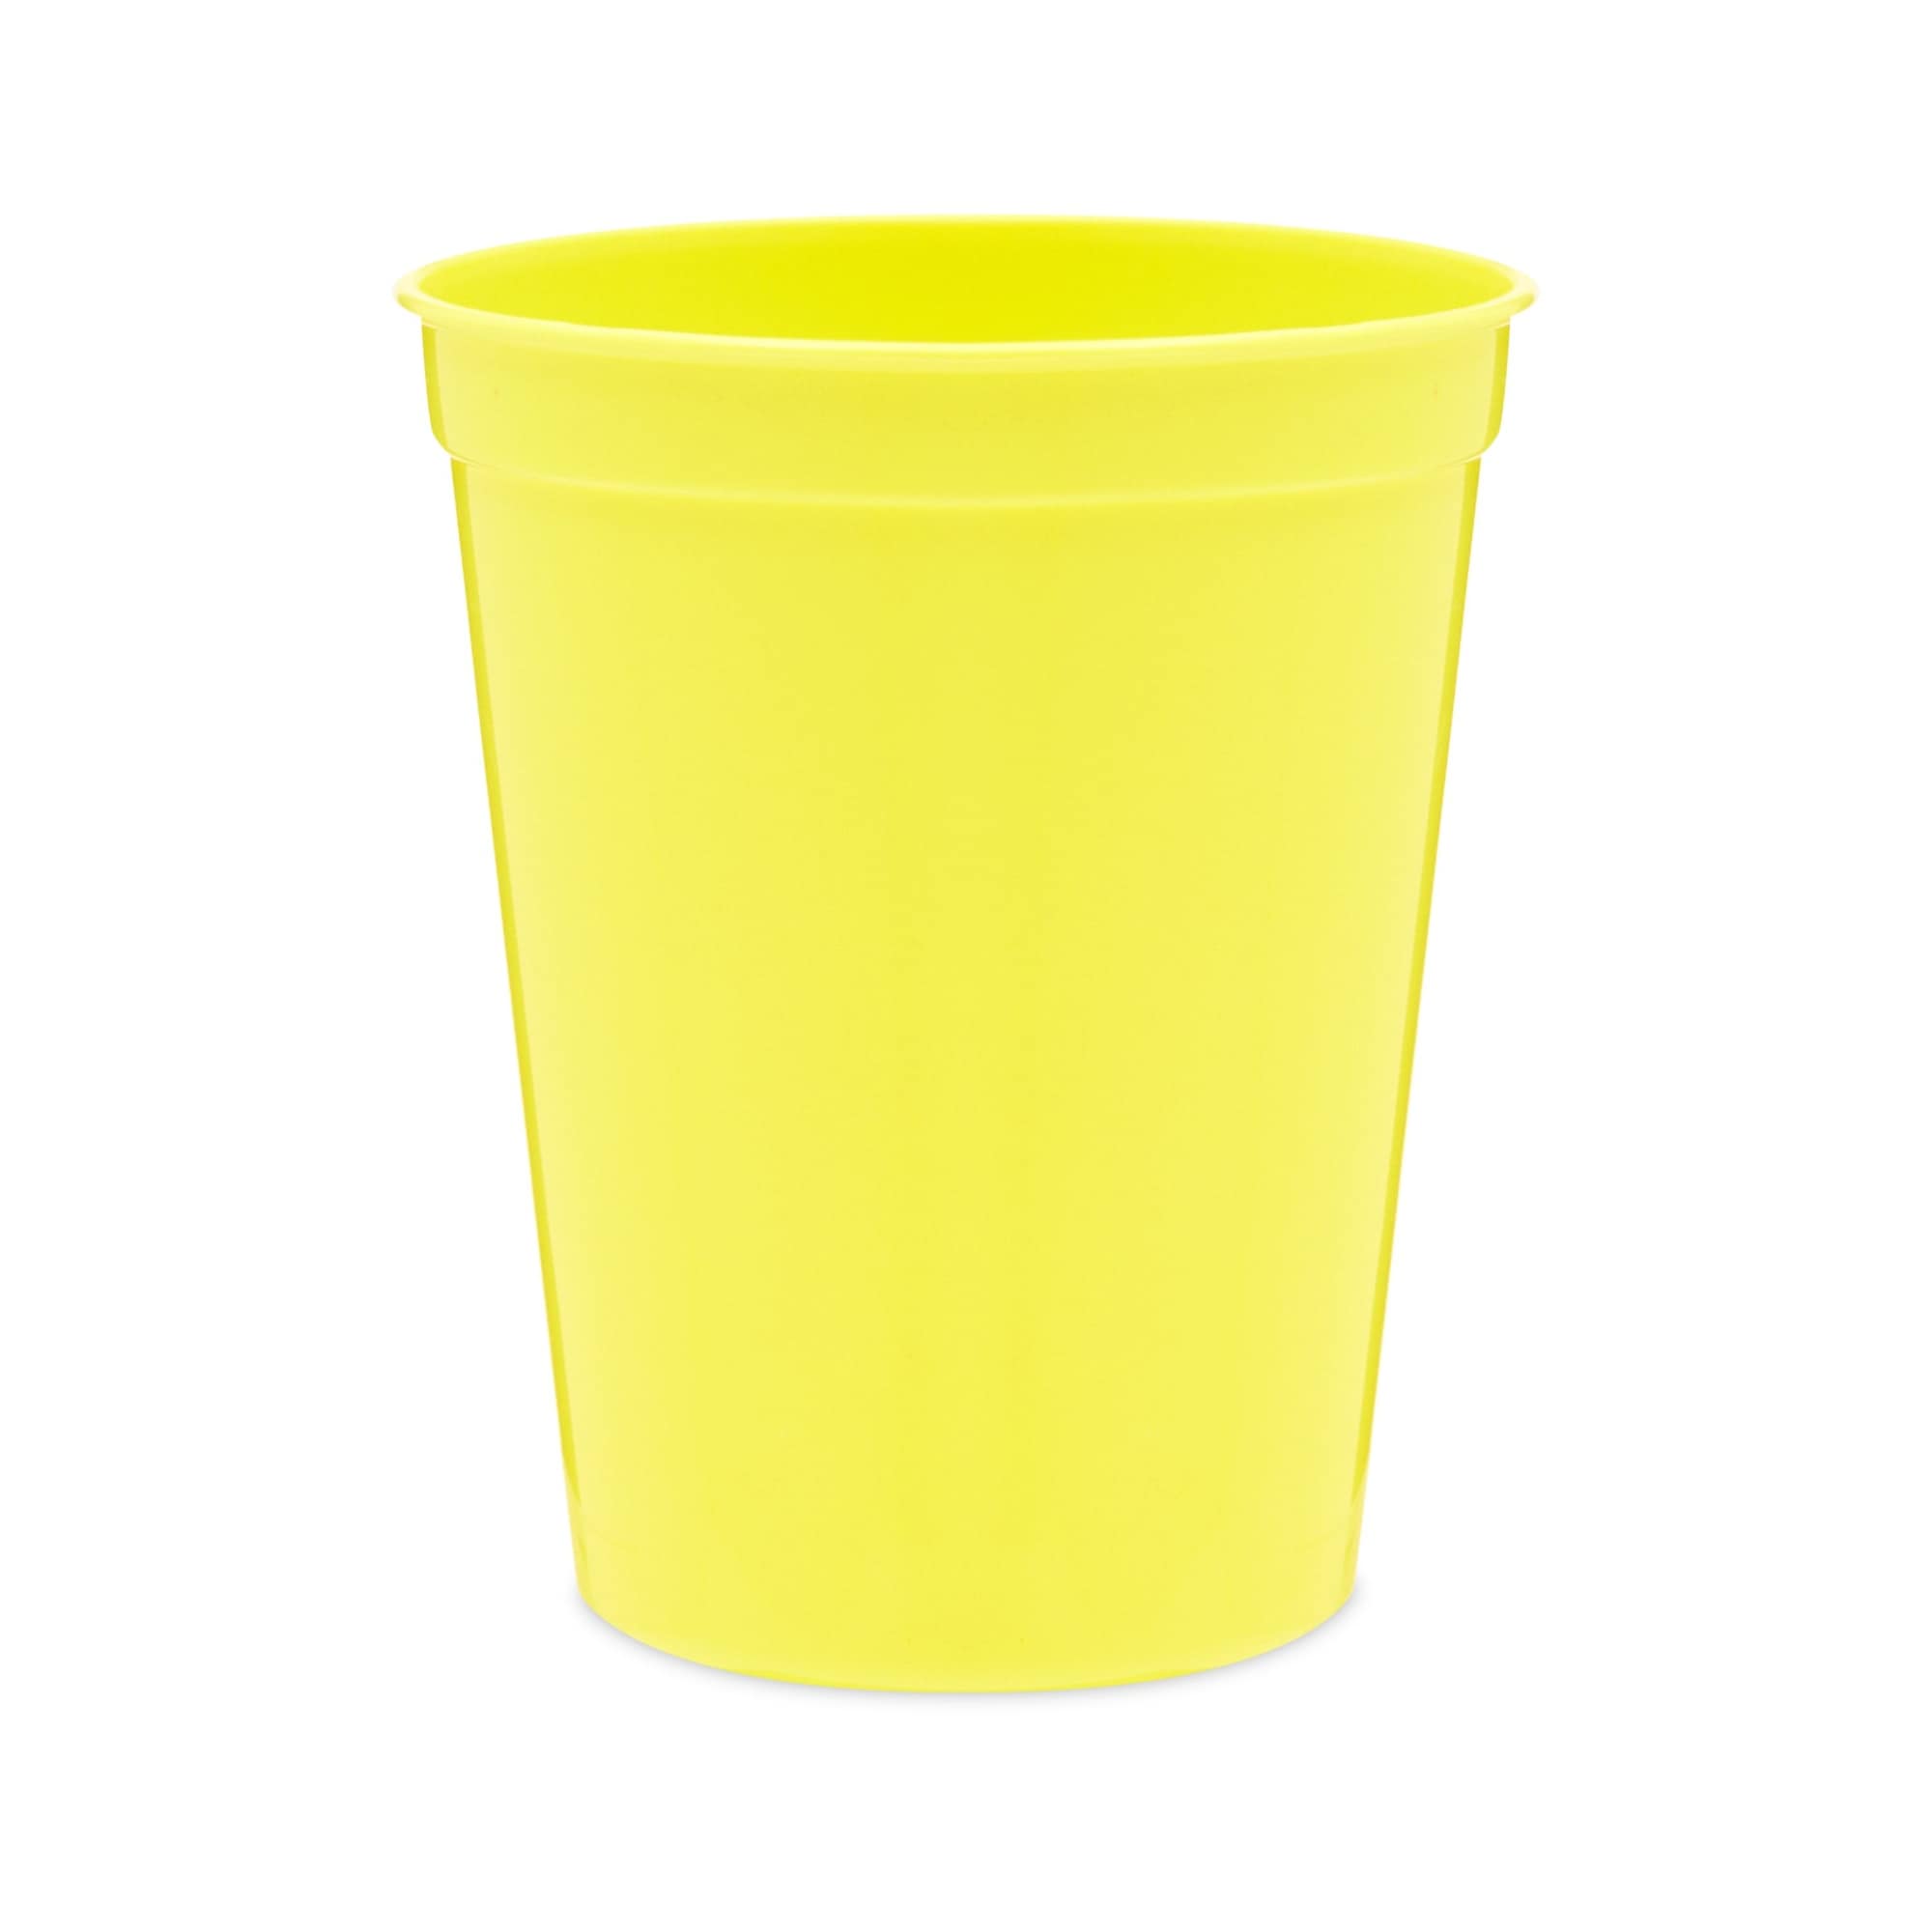 https://ak1.ostkcdn.com/images/products/is/images/direct/b9e1b0e6309dbb3c8022a75dd58cffa337cd69d4/16oz-Yellow-Plastic-Stadium-Cups-for-Birthday-Party%2C-Baby-Shower-%2824-Pack%29.jpg